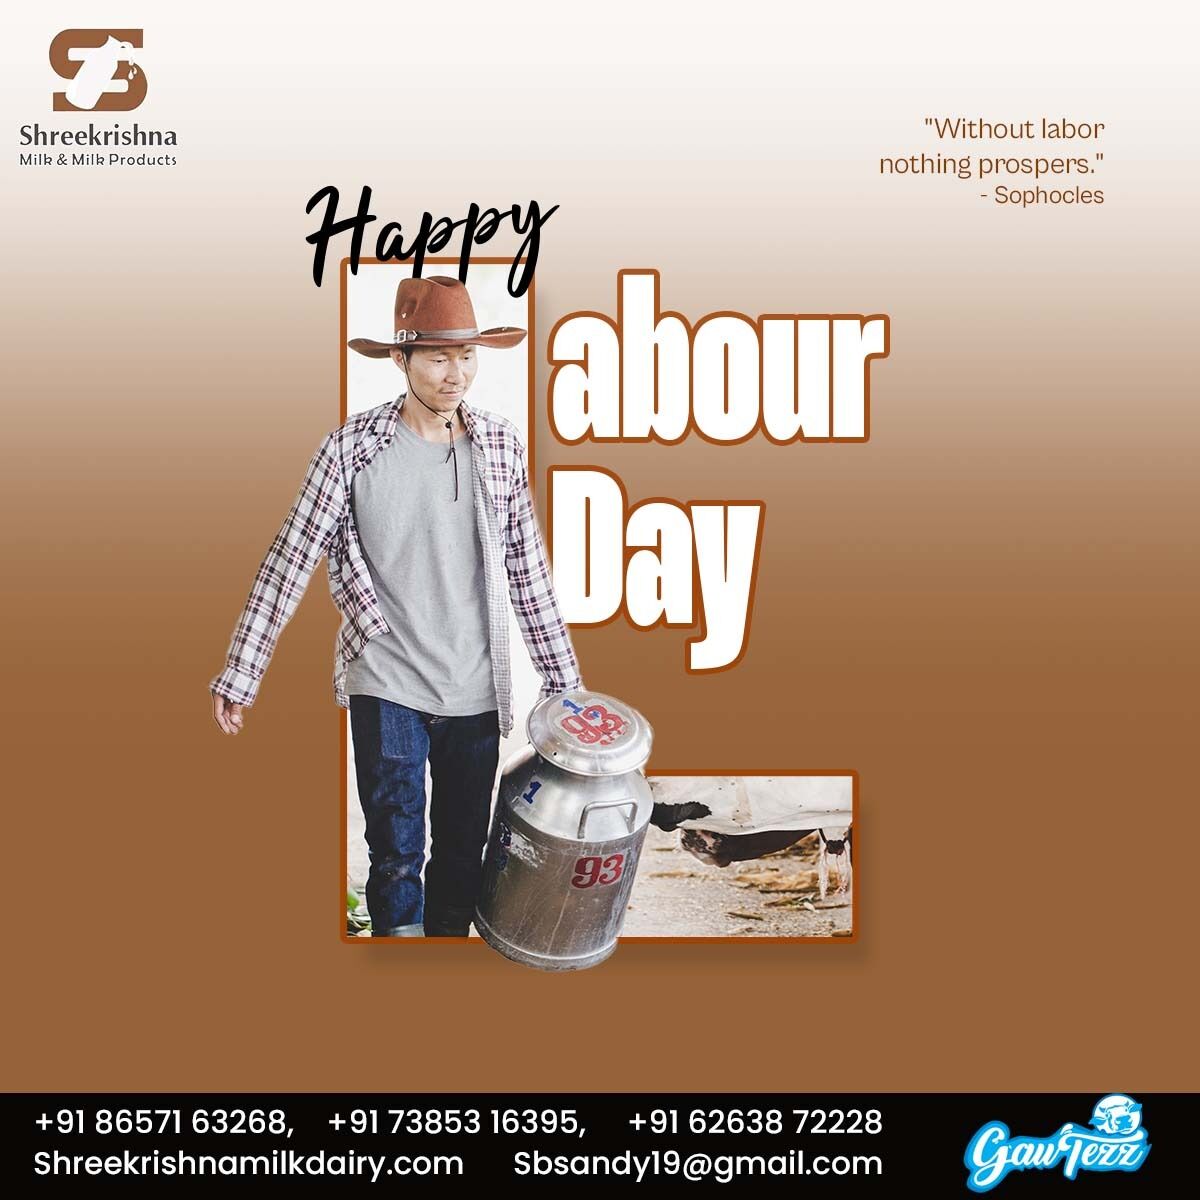 🎉 Happy Labour Day 2023! 🎉
Let's celebrate the hard work and dedication of all the workers who keep our society running! 💪

👨‍🏭👩‍🔧👷‍♀️👨‍🌾👩‍💻👨‍🍳👩‍🏫👨‍⚕️👩‍🚒👮‍♂️

#LabourDay2023 #HappyLabourDay #WorkersOfTheWorldUnite #LaborRights #FairWages #SocialJustice #Solidarity #DignityOfWork